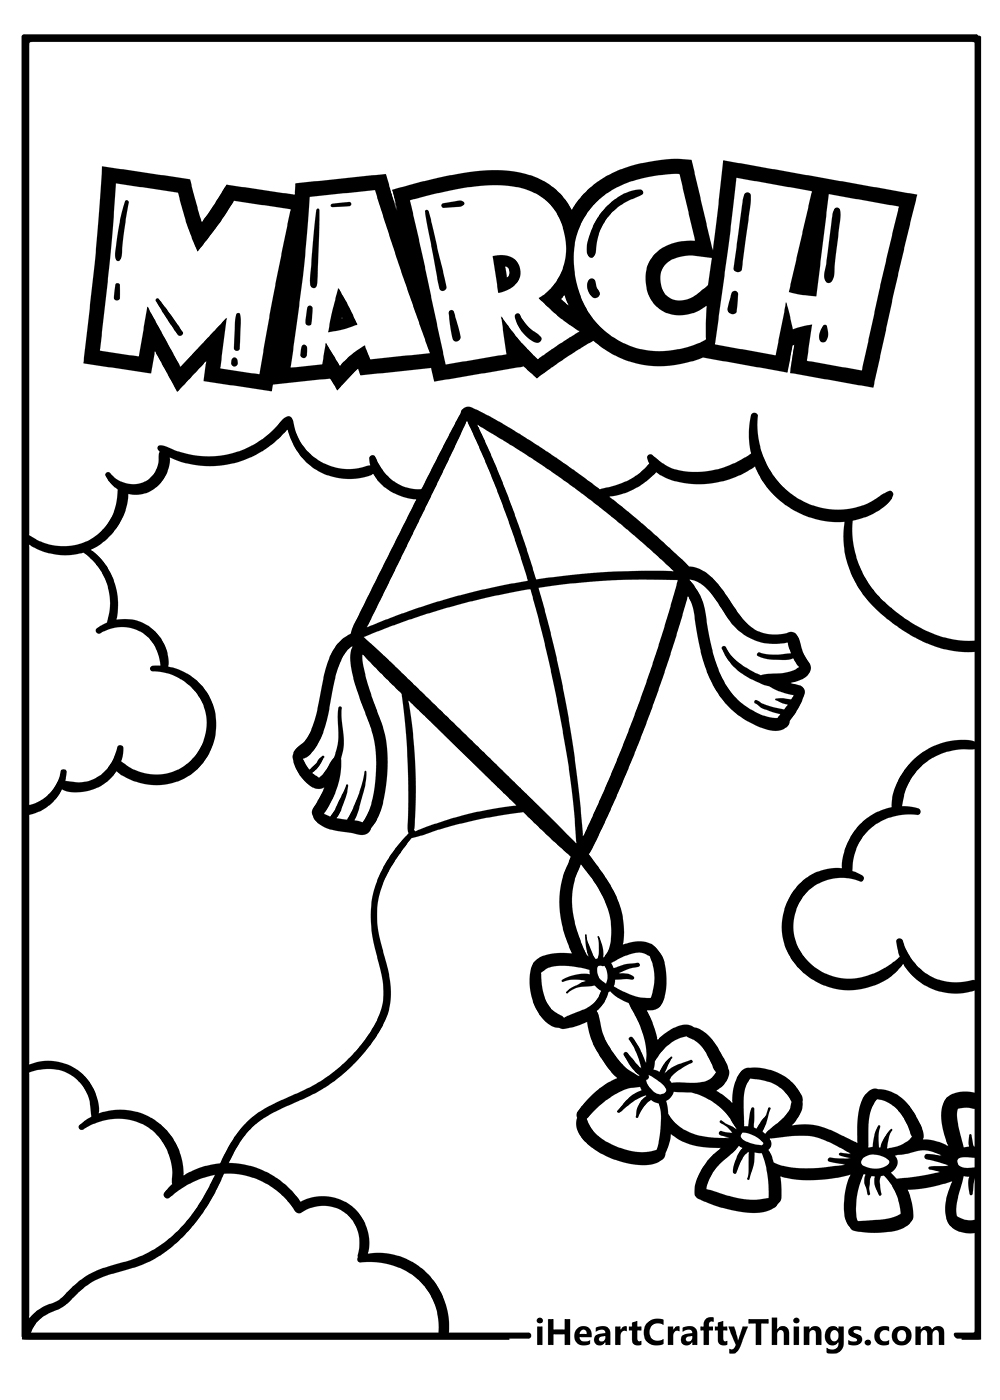 March Coloring Pages free pdf download